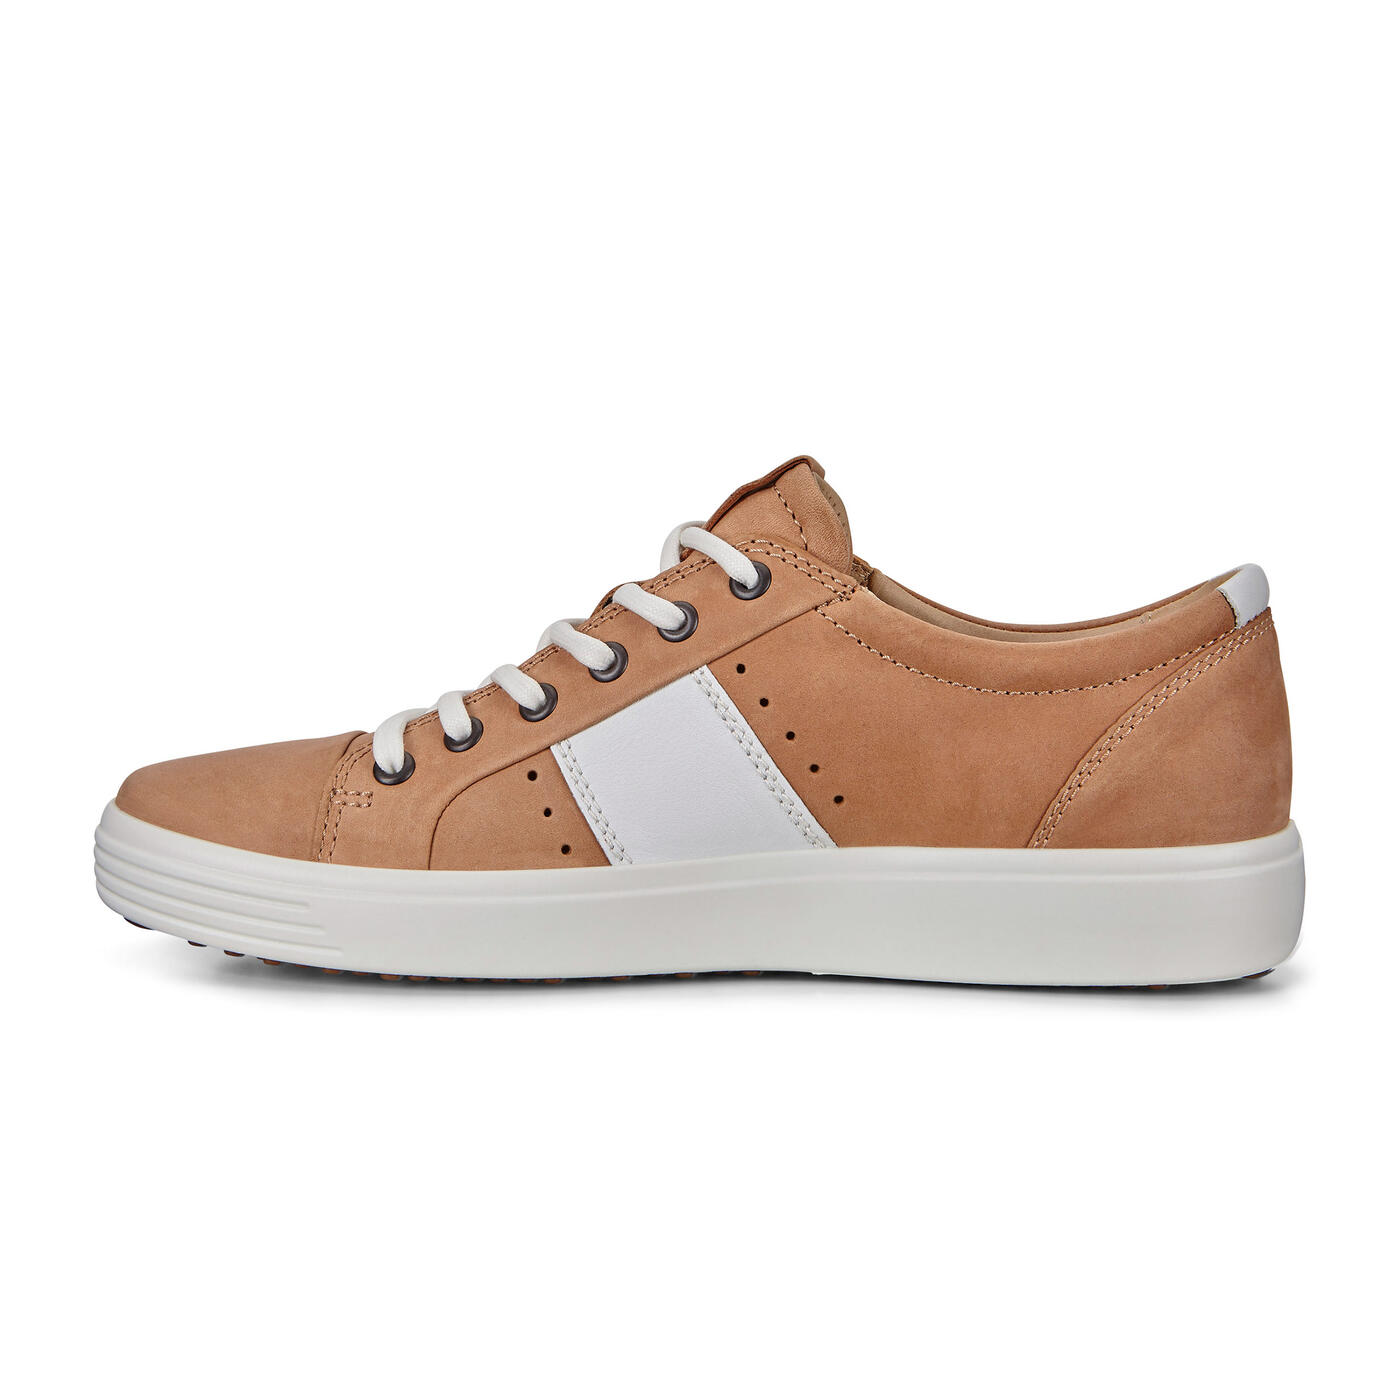 ECCO Soft 7 Men's Leather Sneakers | ECCO® Shoes